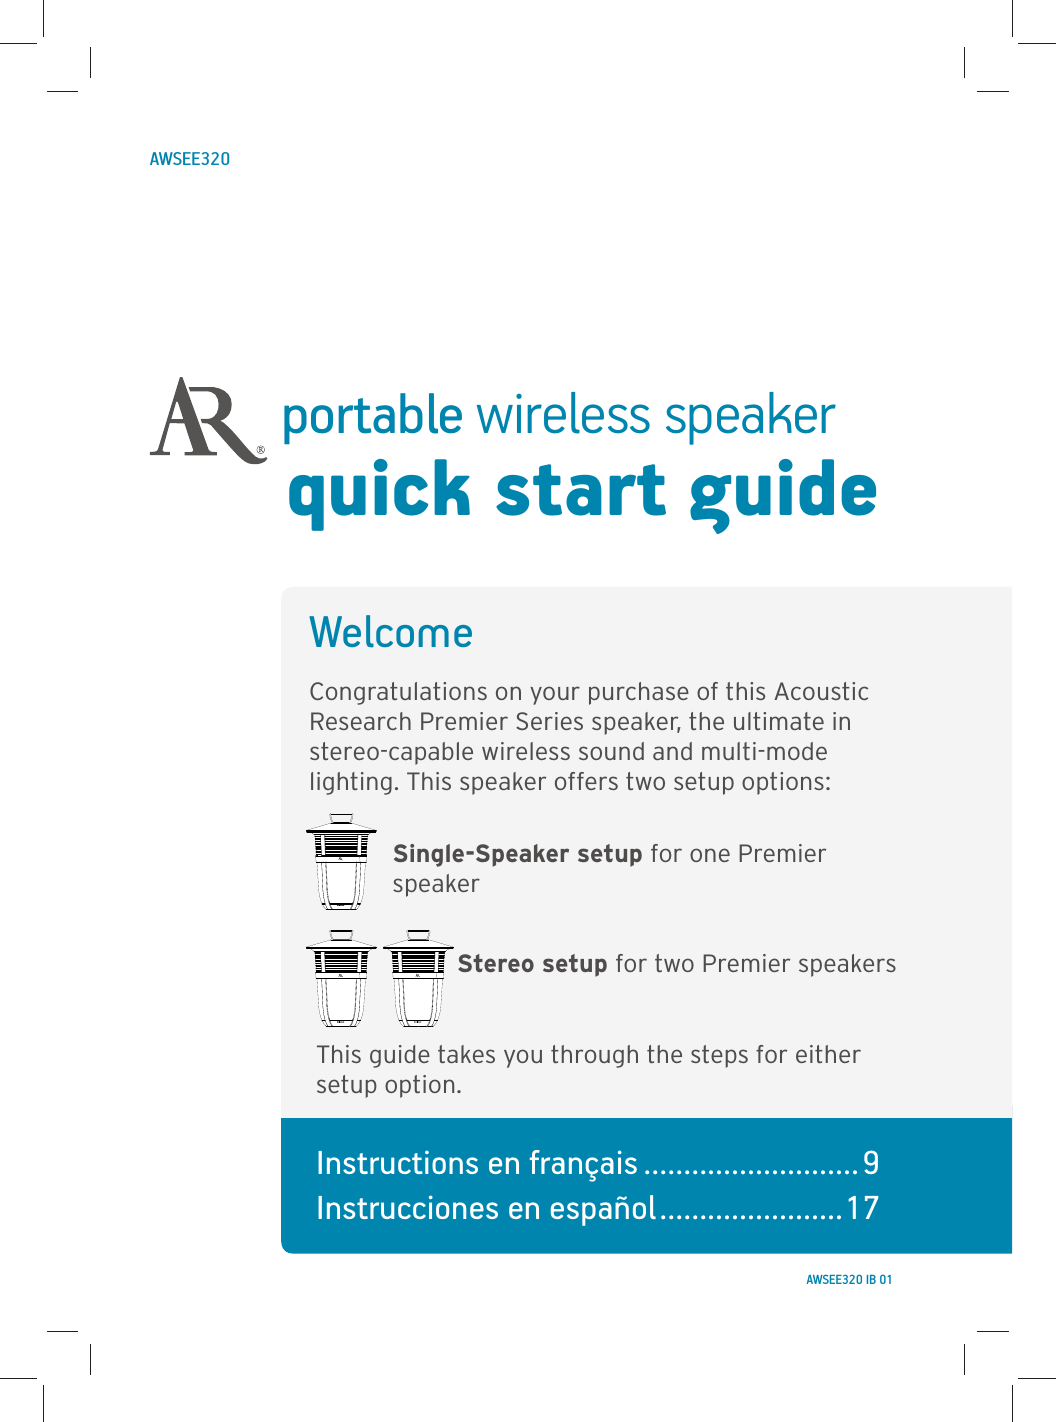 portable wireless speakerquick start guideWelcomeCongratulations on your purchase of this Acoustic Research Premier Series speaker, the ultimate in stereo-capable wireless sound and multi-mode lighting. This speaker offers two setup options:Single-Speaker setup for one Premier speakerStereo setup for two Premier speakersThis guide takes you through the steps for either setup option.AWSEE320Instructions en français ...........................9 Instrucciones en español .......................17AWSEE320 IB 01